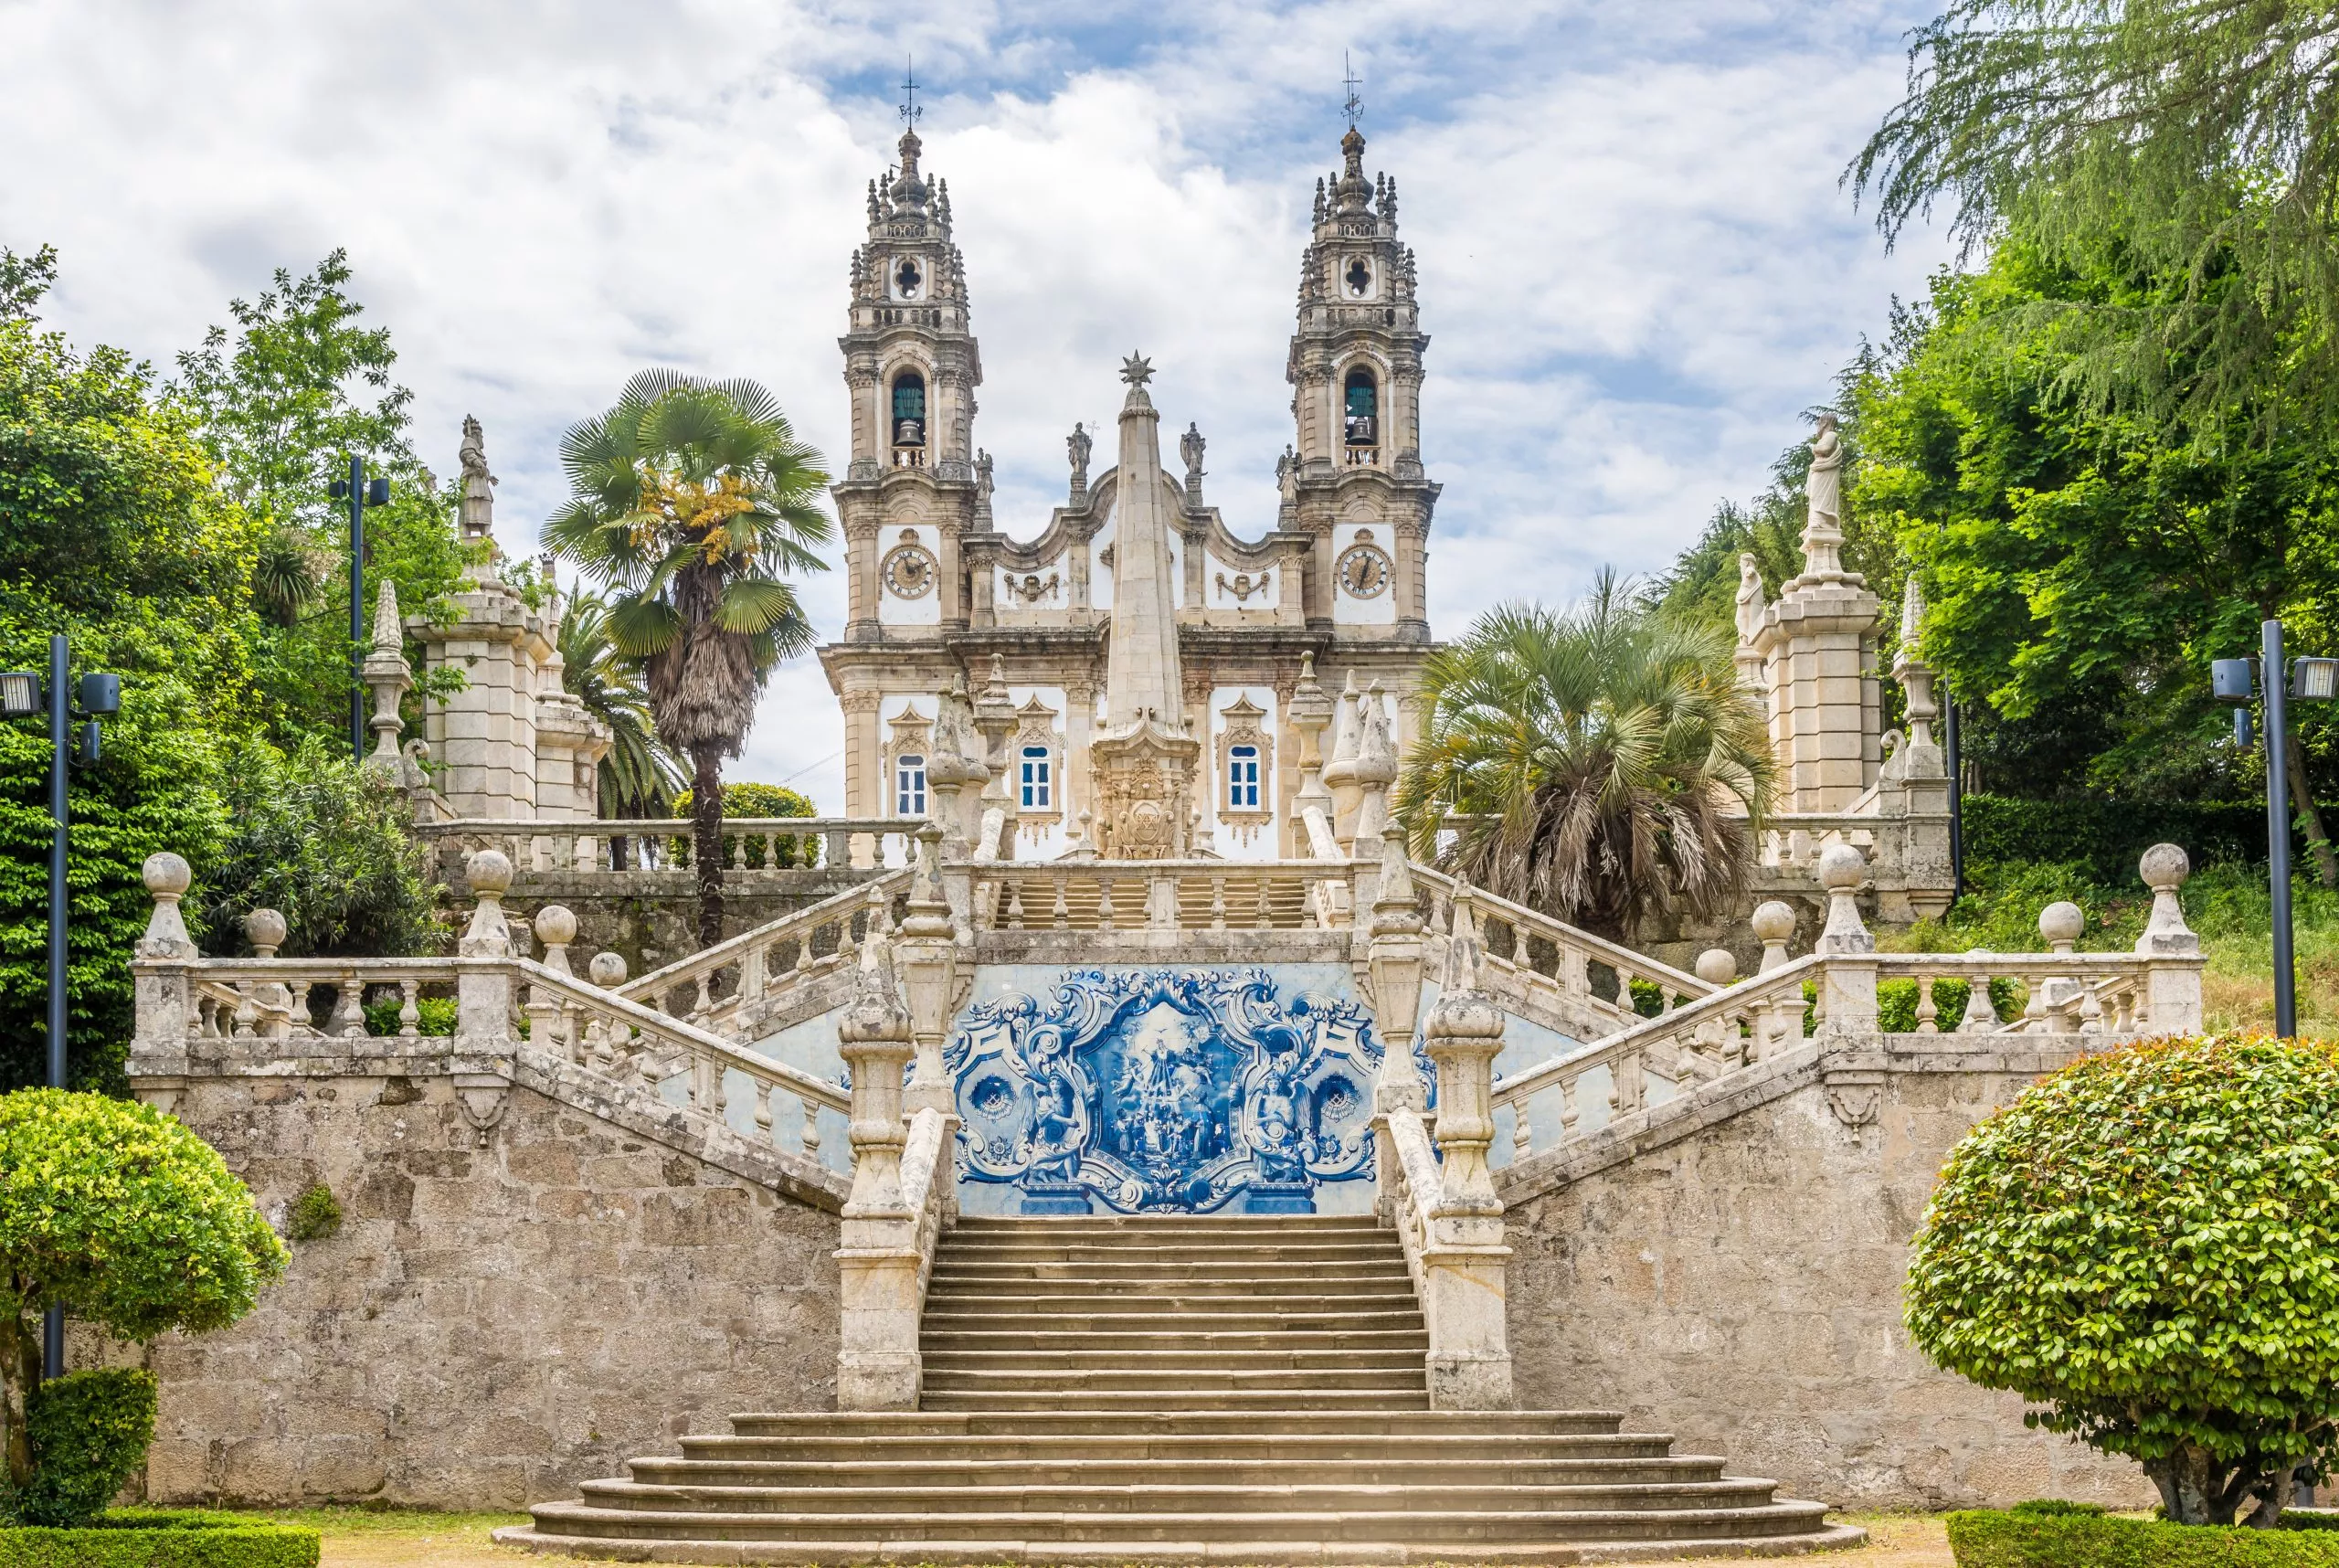 Azulejo decorated stairway to the Sanctuary of Our Lady of Remedios in Lamego ,Portugal